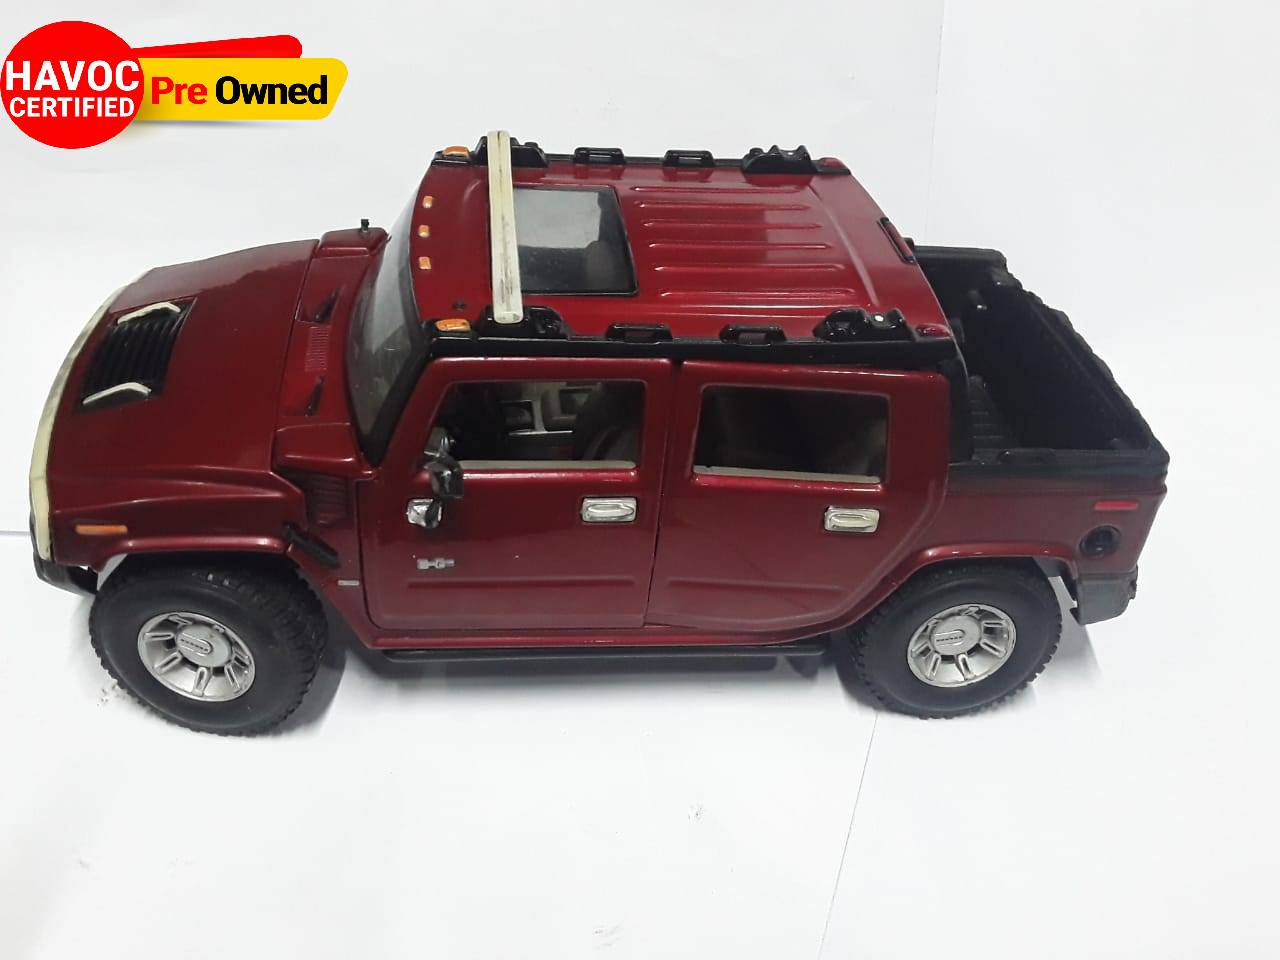 DIECAST CAR HUMMER-QUALITY PRE OWNED